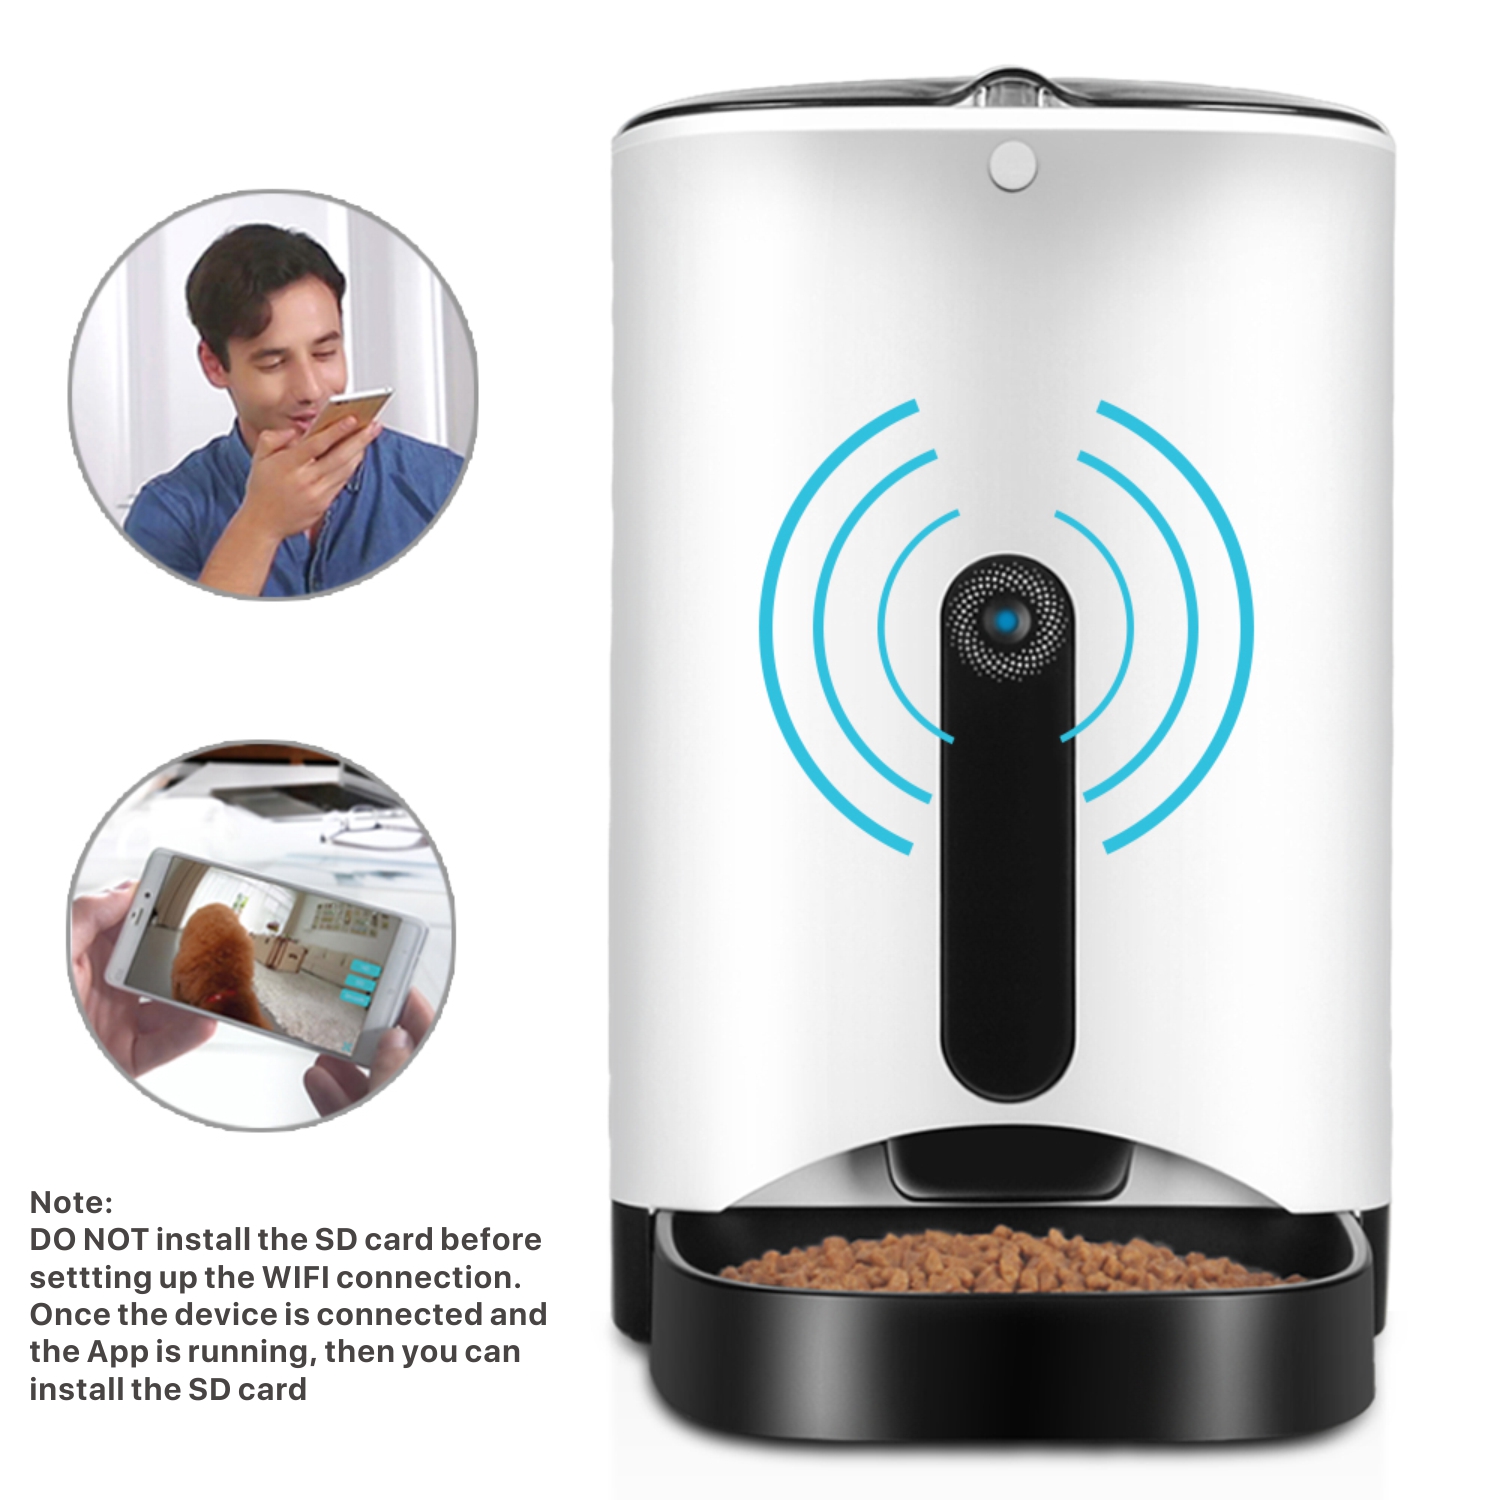 Customizable Feeding - The Smart Pet Feeder enables you to set times as well as food quantity to feed your pet automatically or choose to do a manual feeding on your mobile device instantly; Your mobile device can be used to control your pet feeder from wherever you are through the mobile app